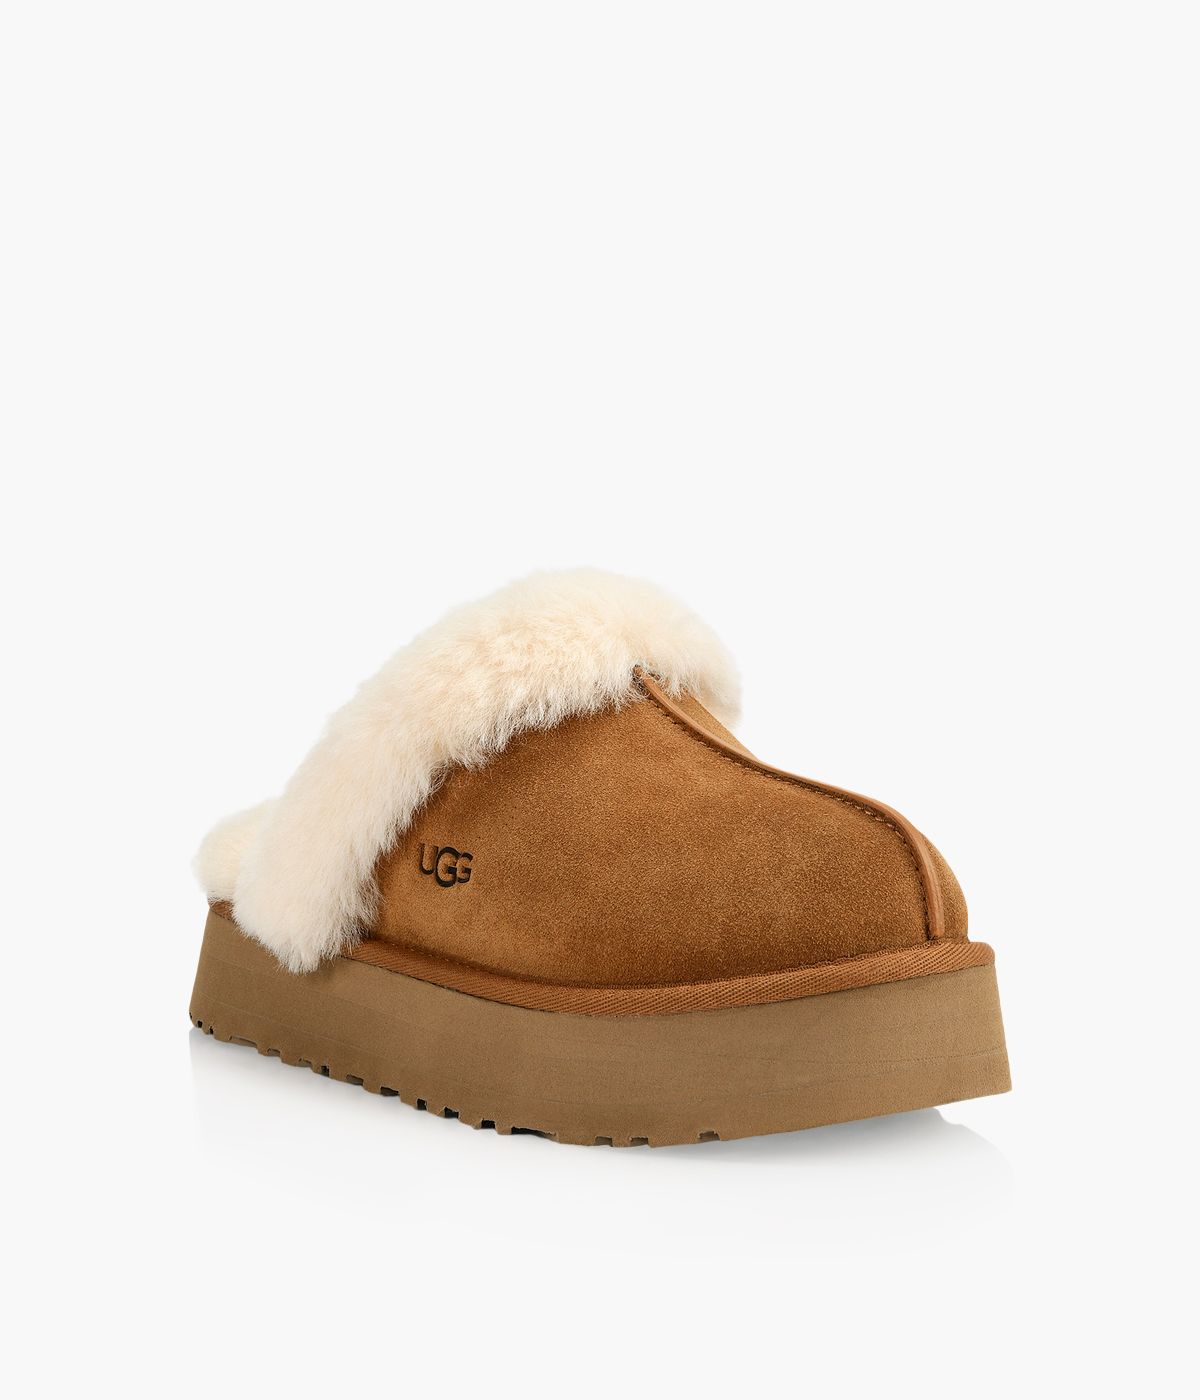 UGG DISQUETTE - Sheepskin | Browns Shoes